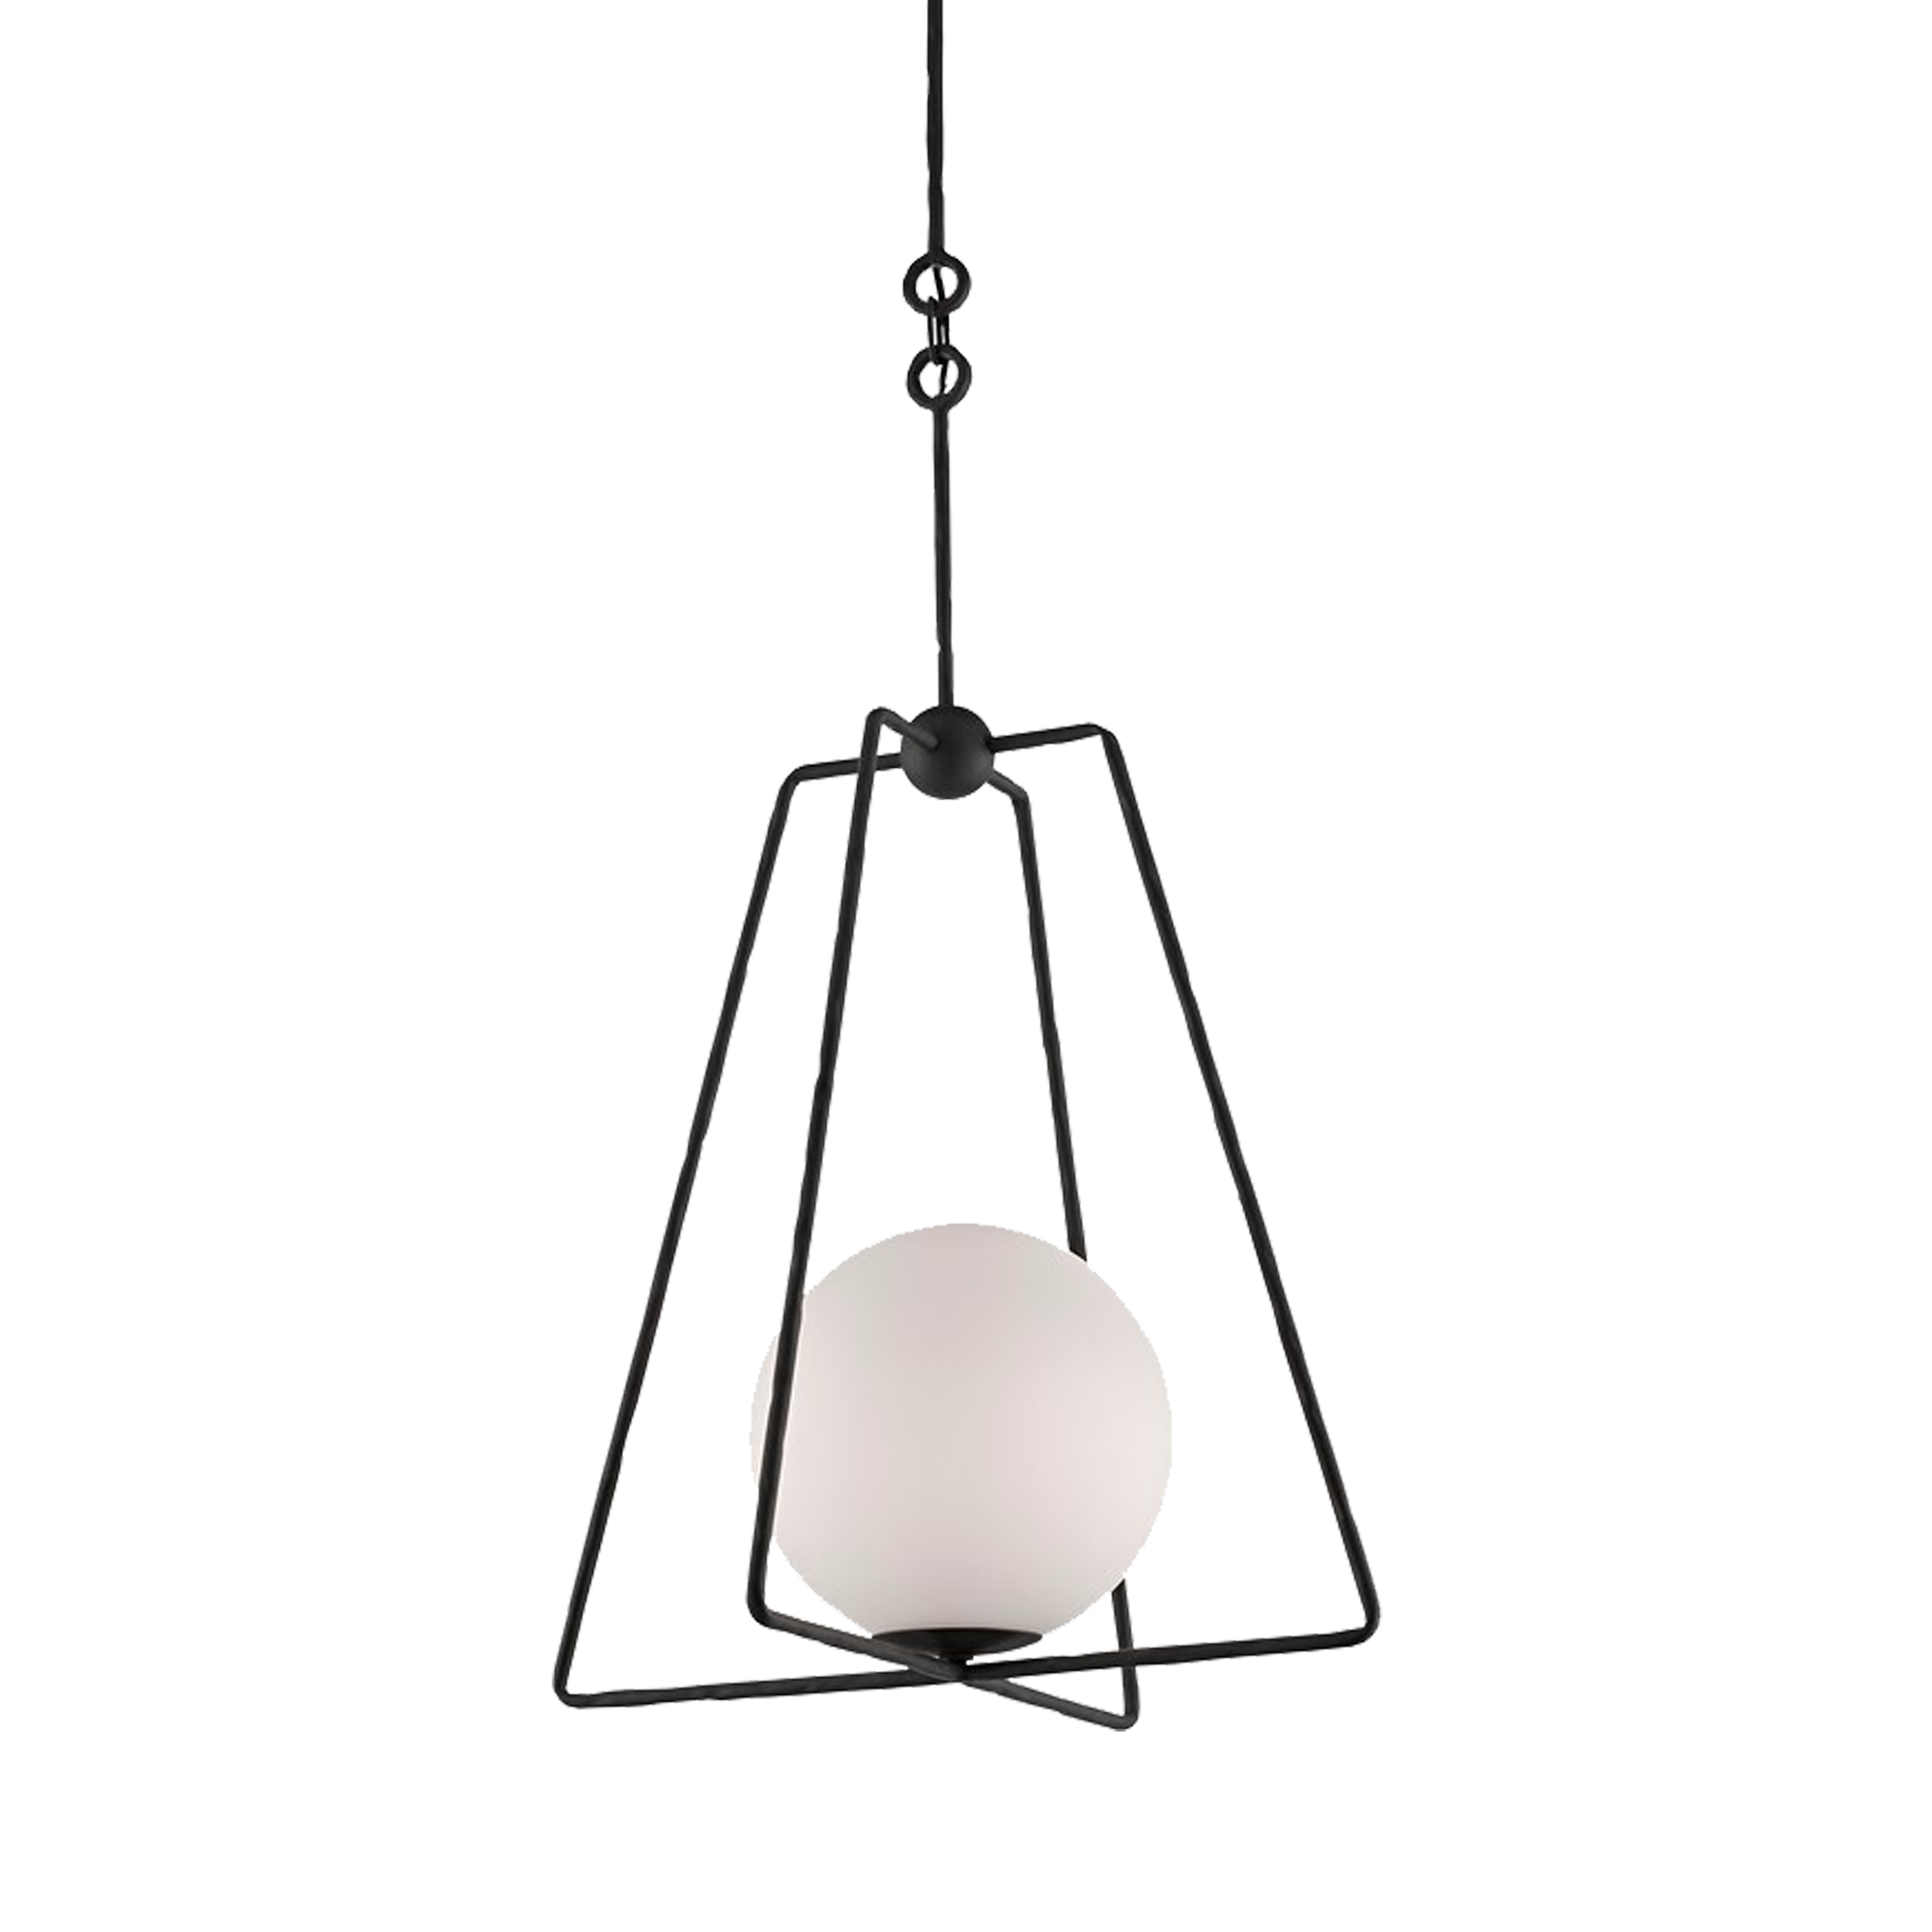 The wrought iron frame of this Globe Pendant, in an antique bronze finish, reads as if its arms are akimbo to cradle the white glass globe like a heavenly crane coddling the moon.